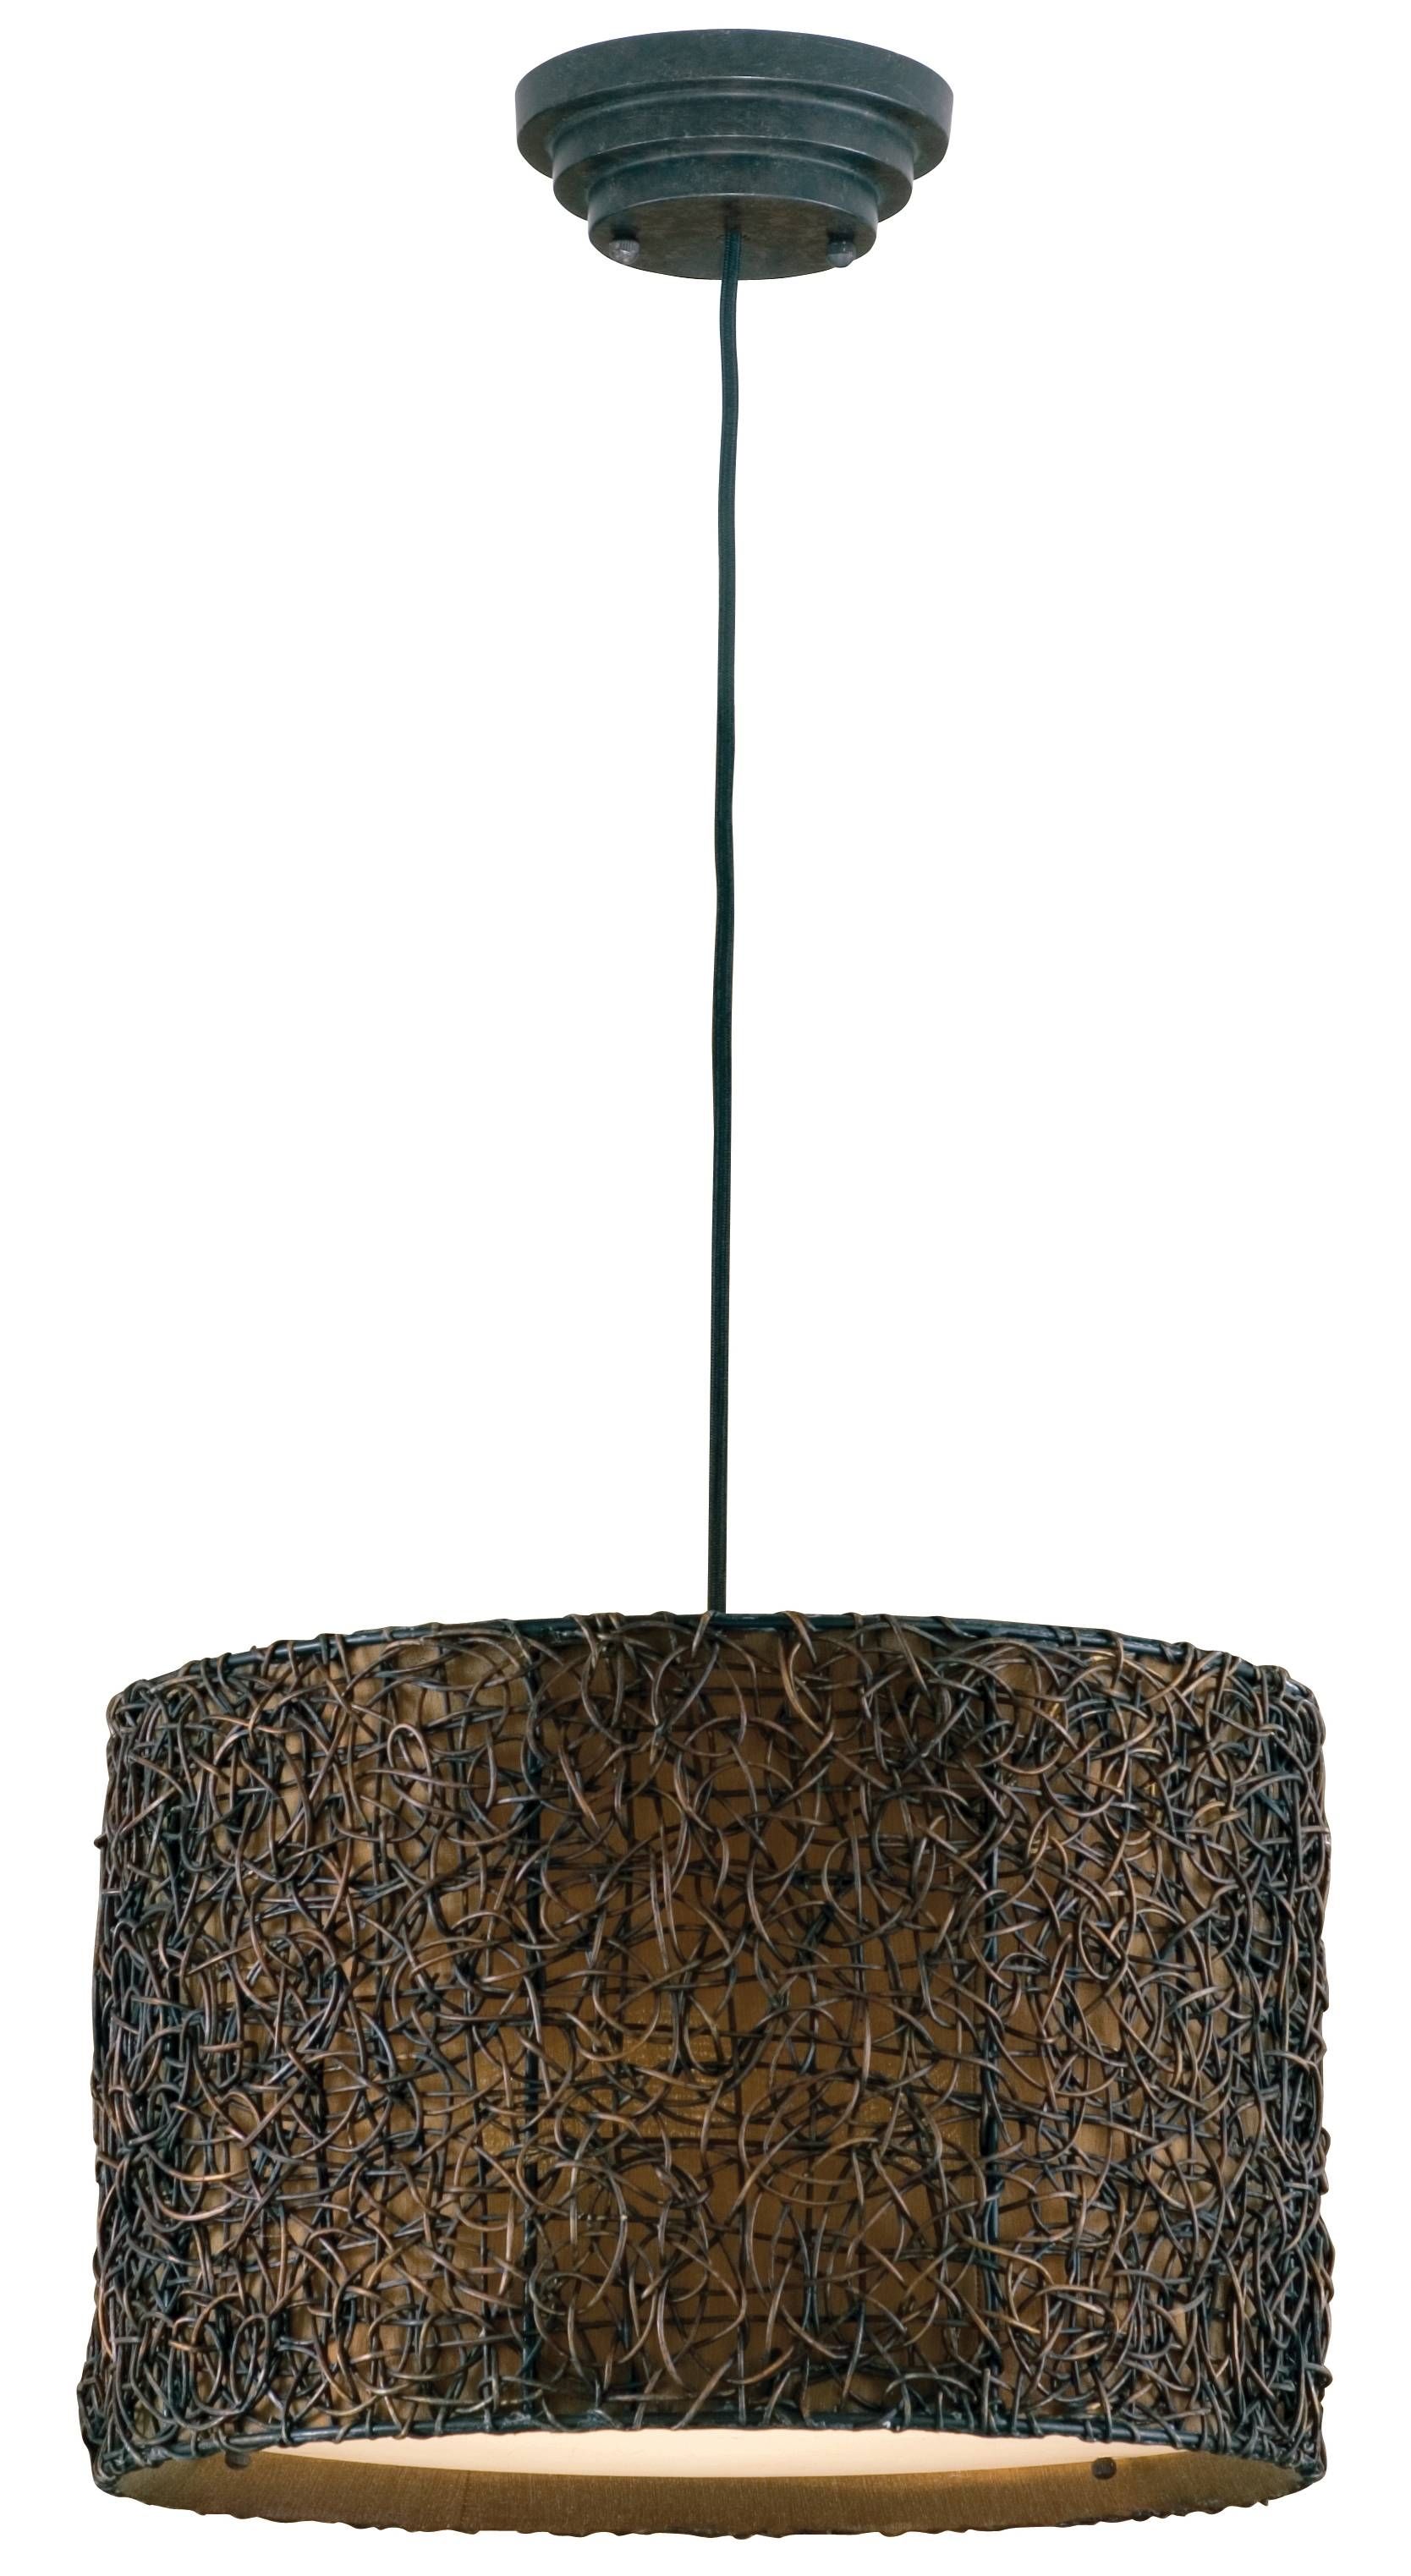 Home Decor + Home Lighting Blog » 2010 » August Intended For Rattan Lights Fixtures (View 13 of 15)